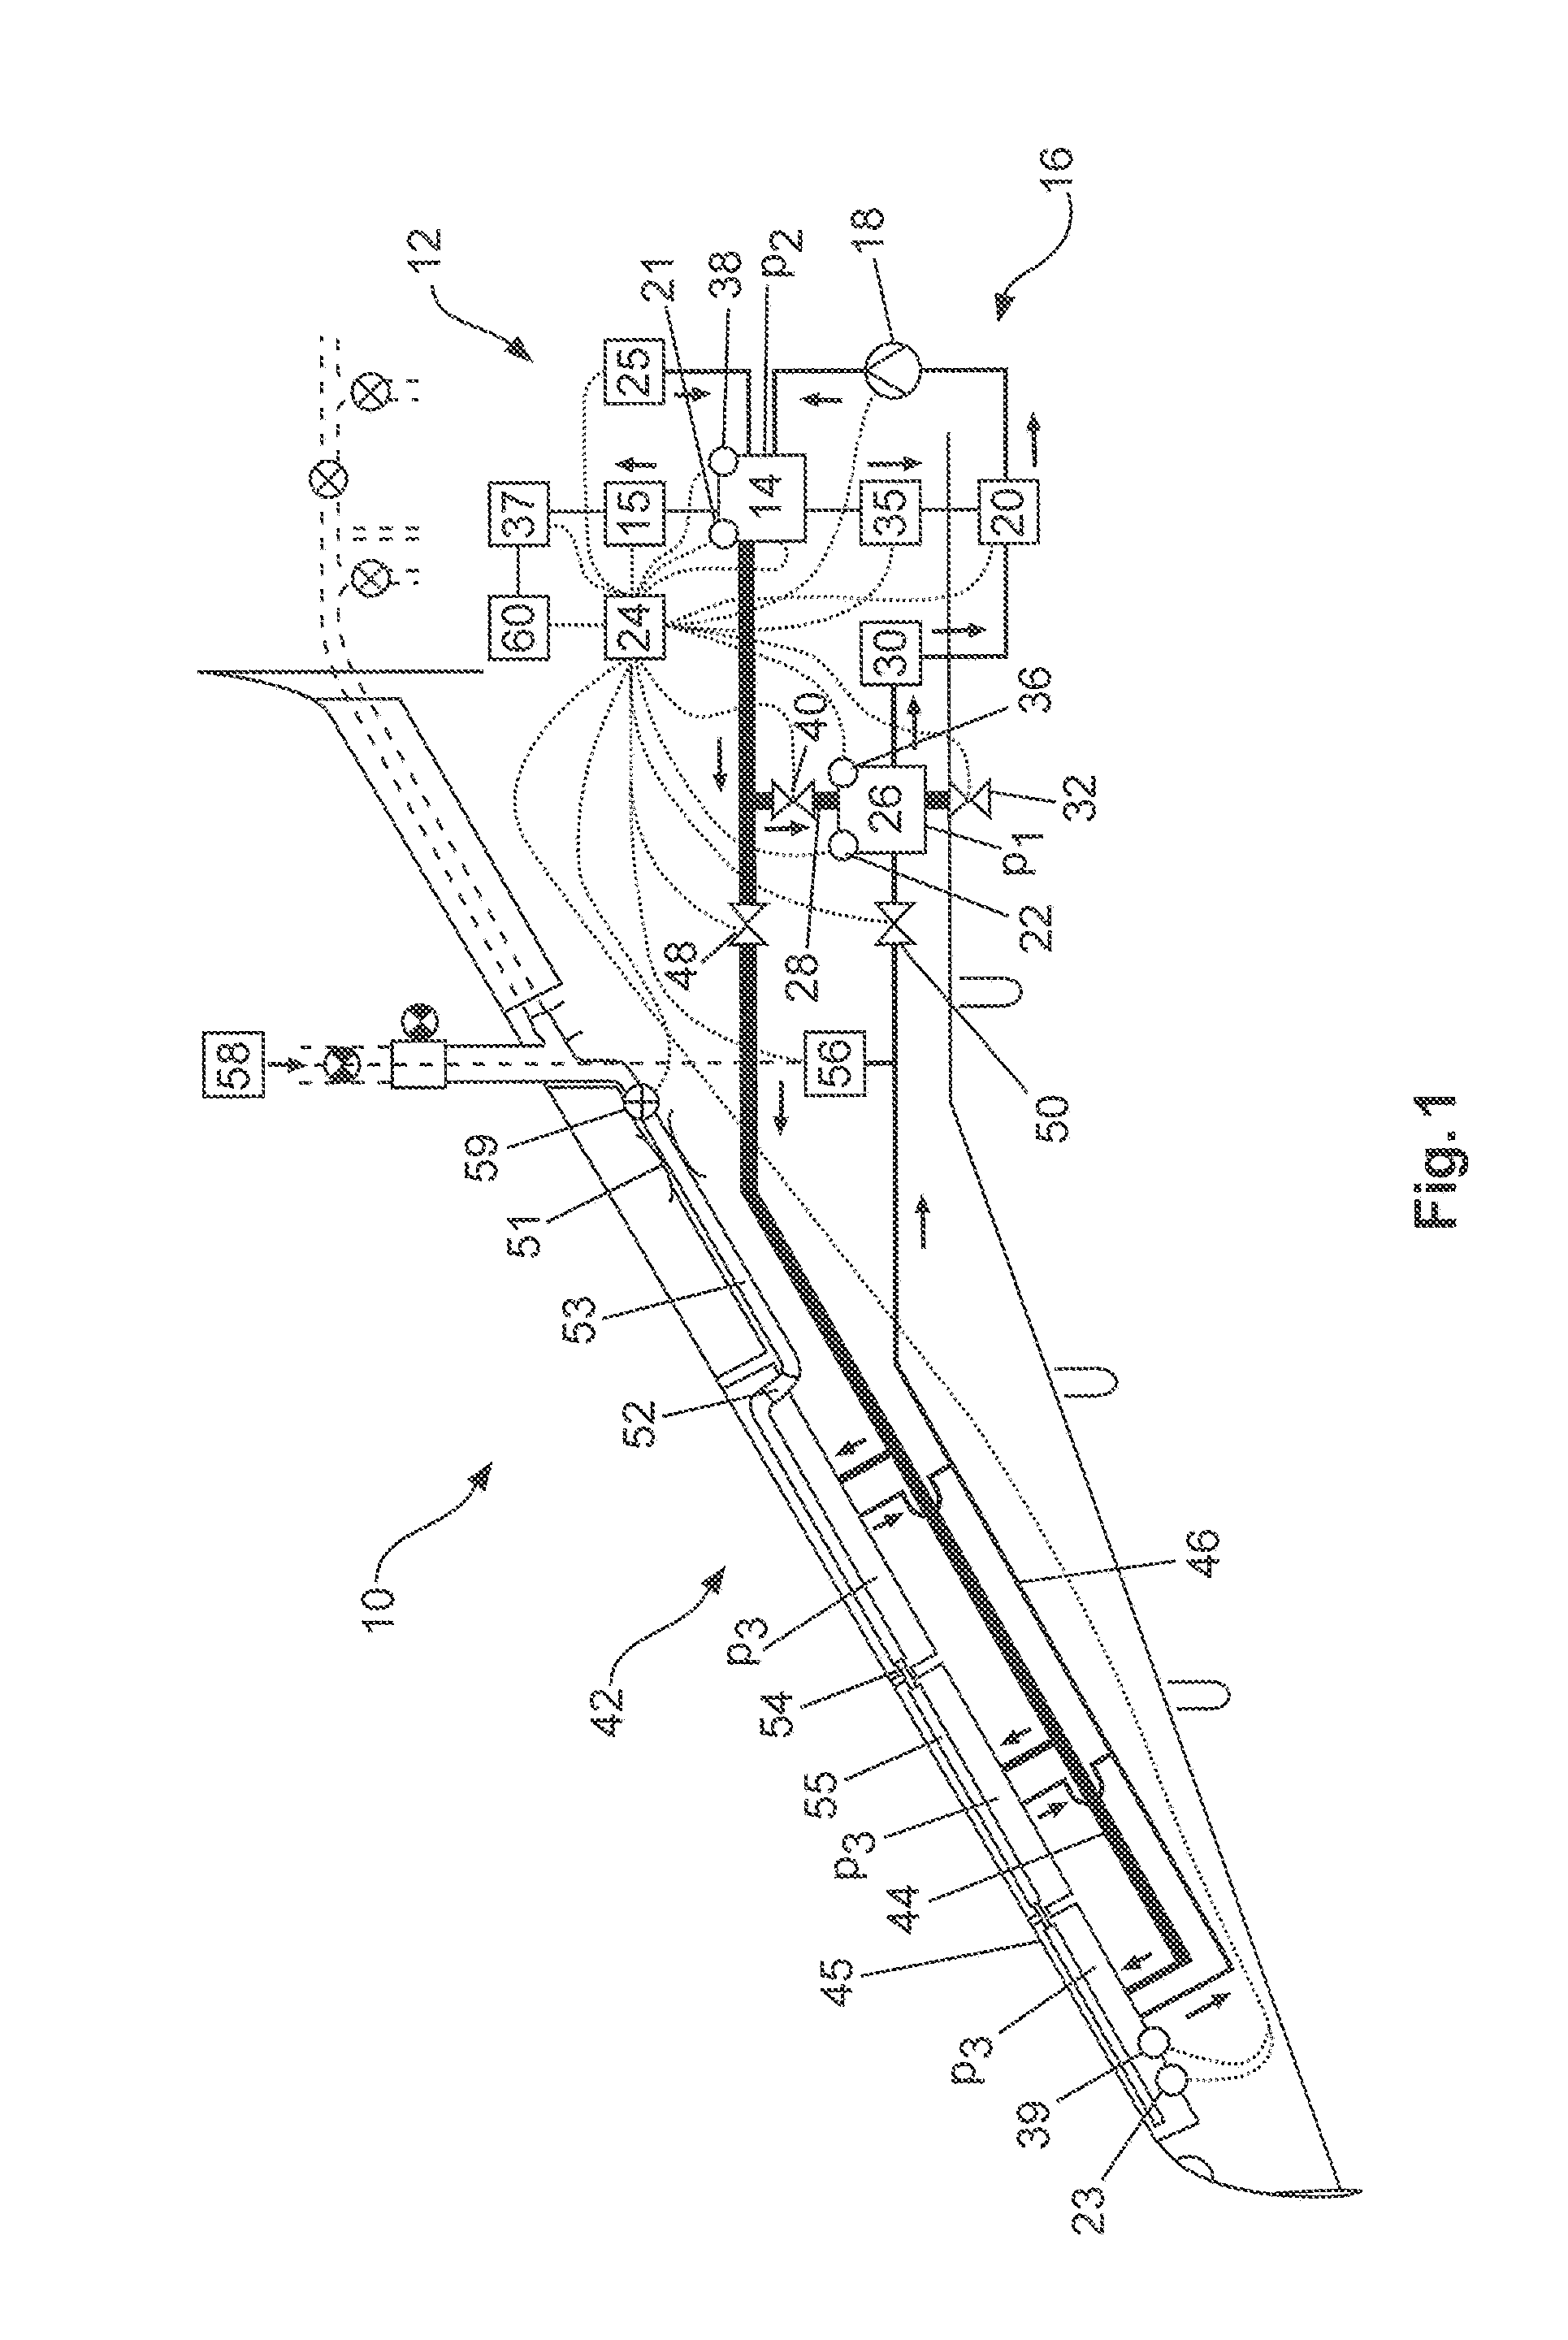 Icing protection system for an aircraft and method for operating an icing protection system